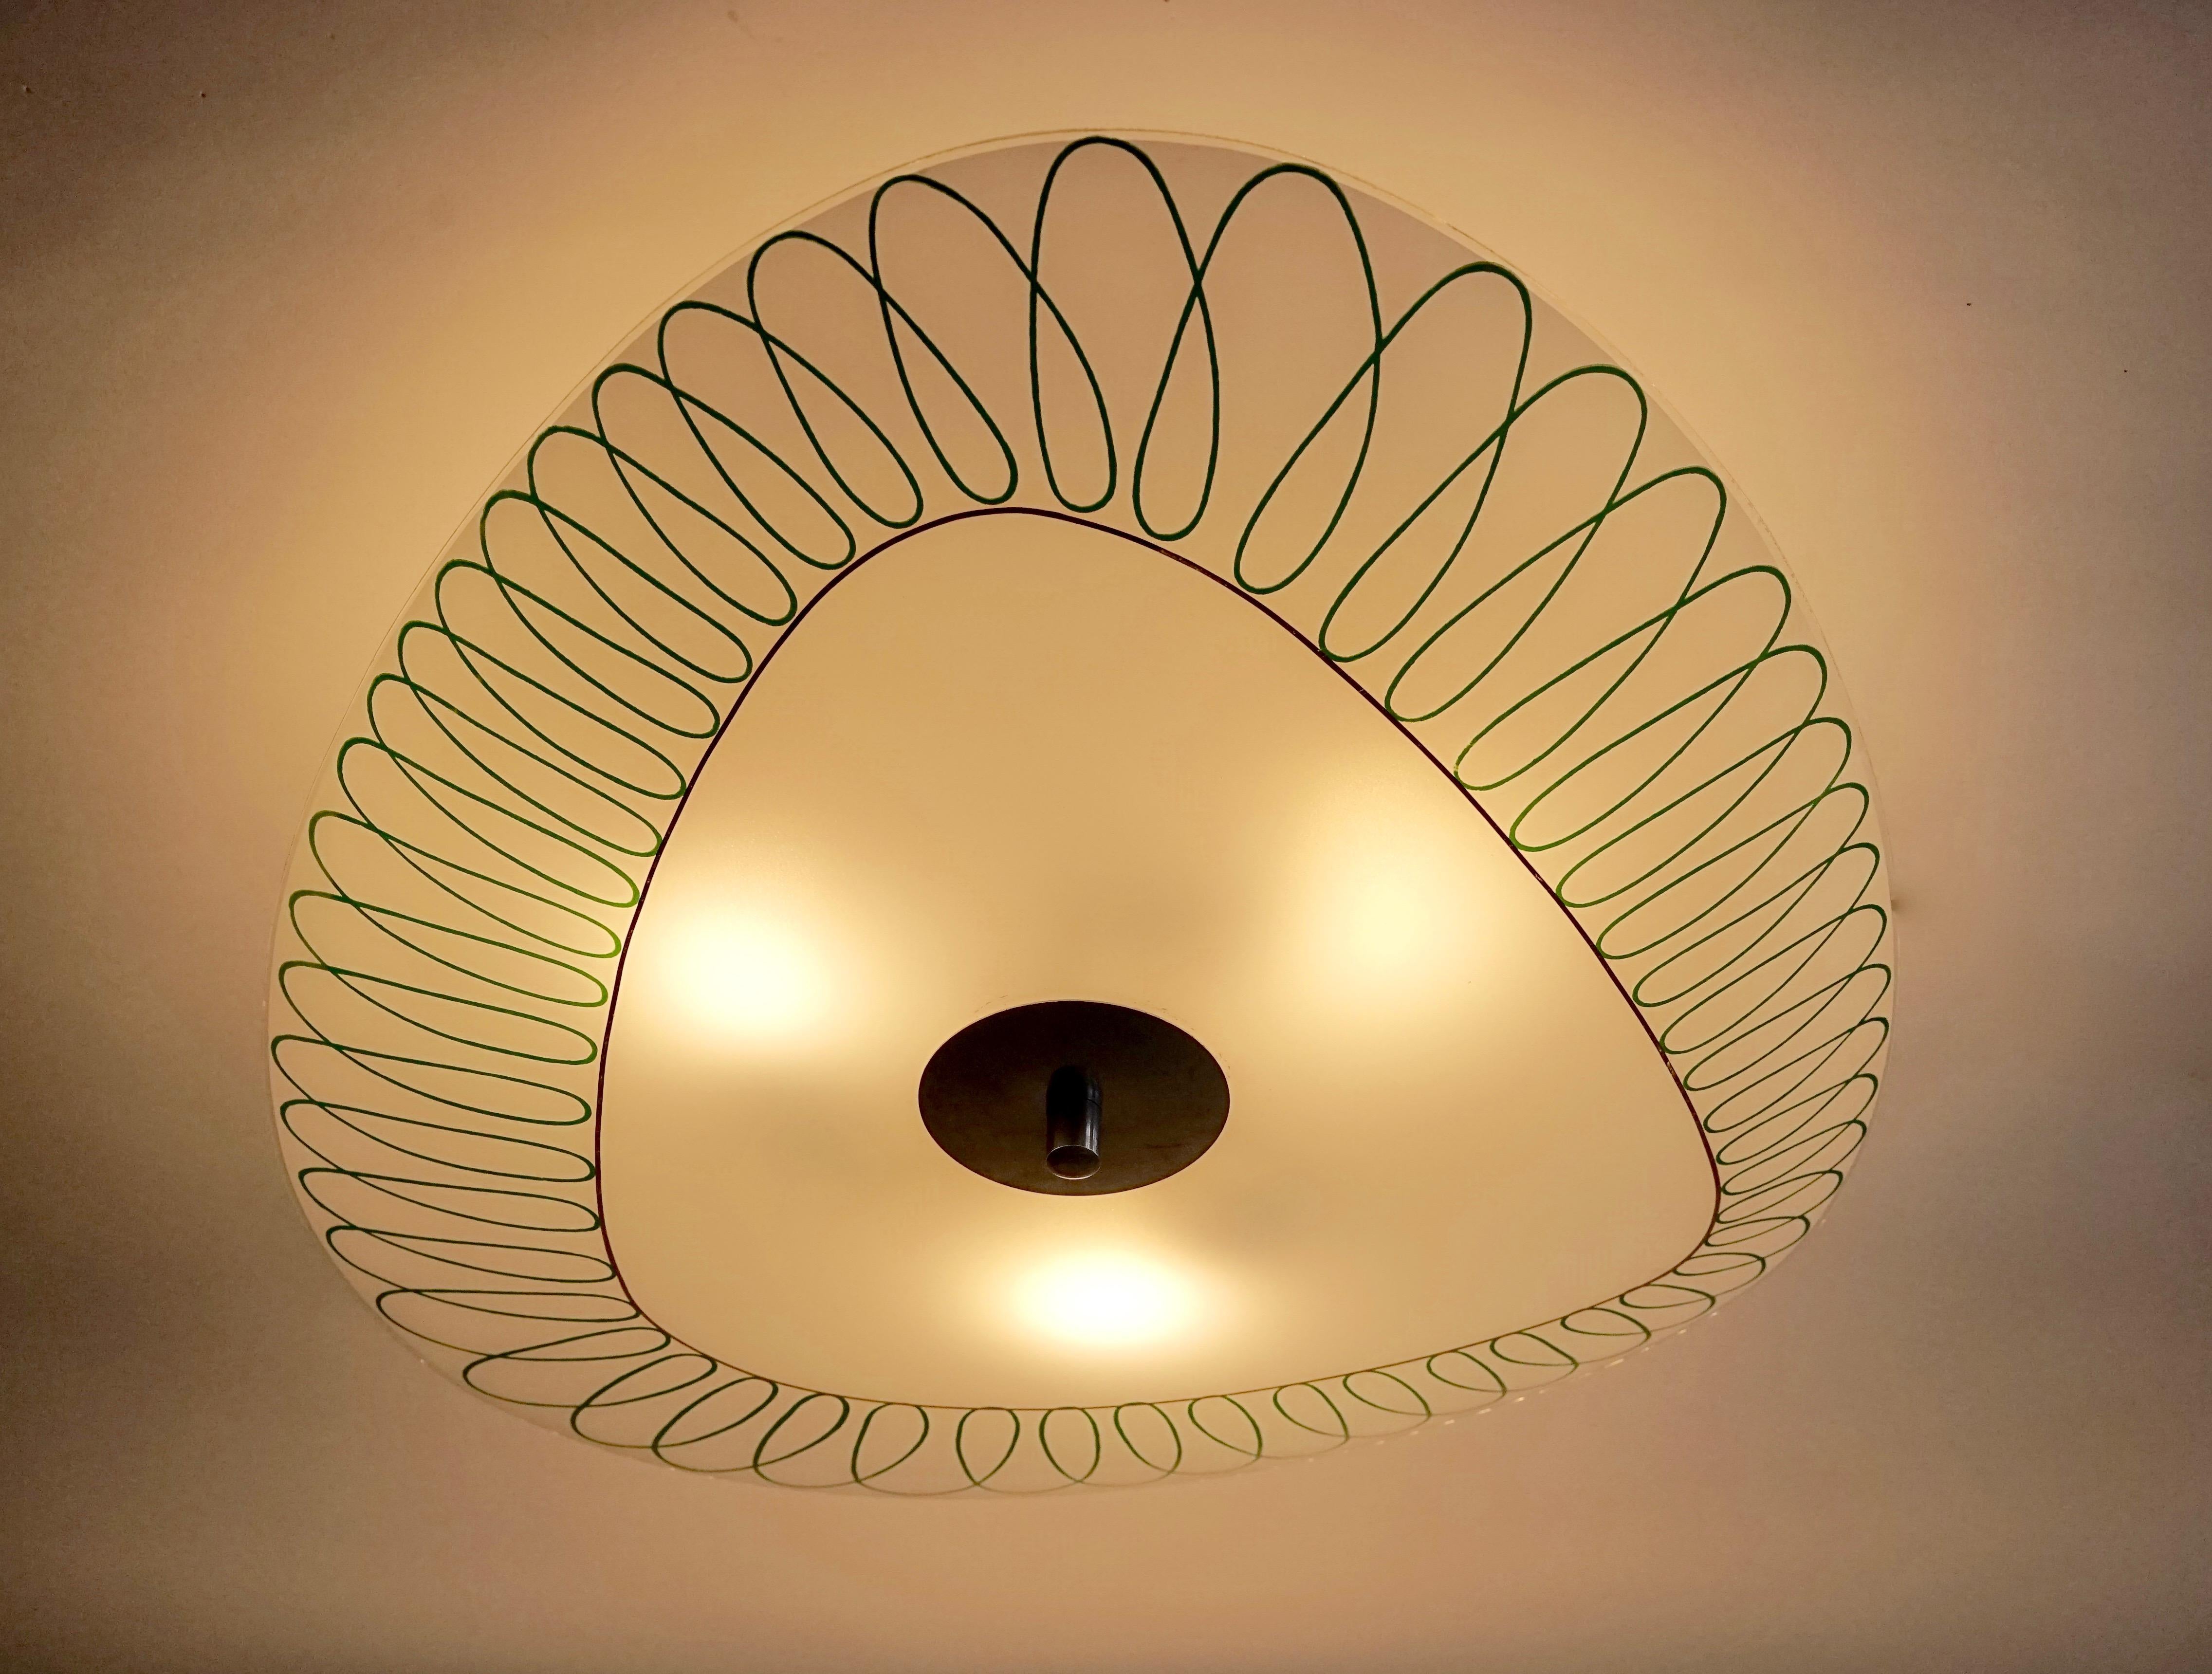 Brussels Styled Ceiling Lamps, 1950s-1960s from Napako For Sale 4